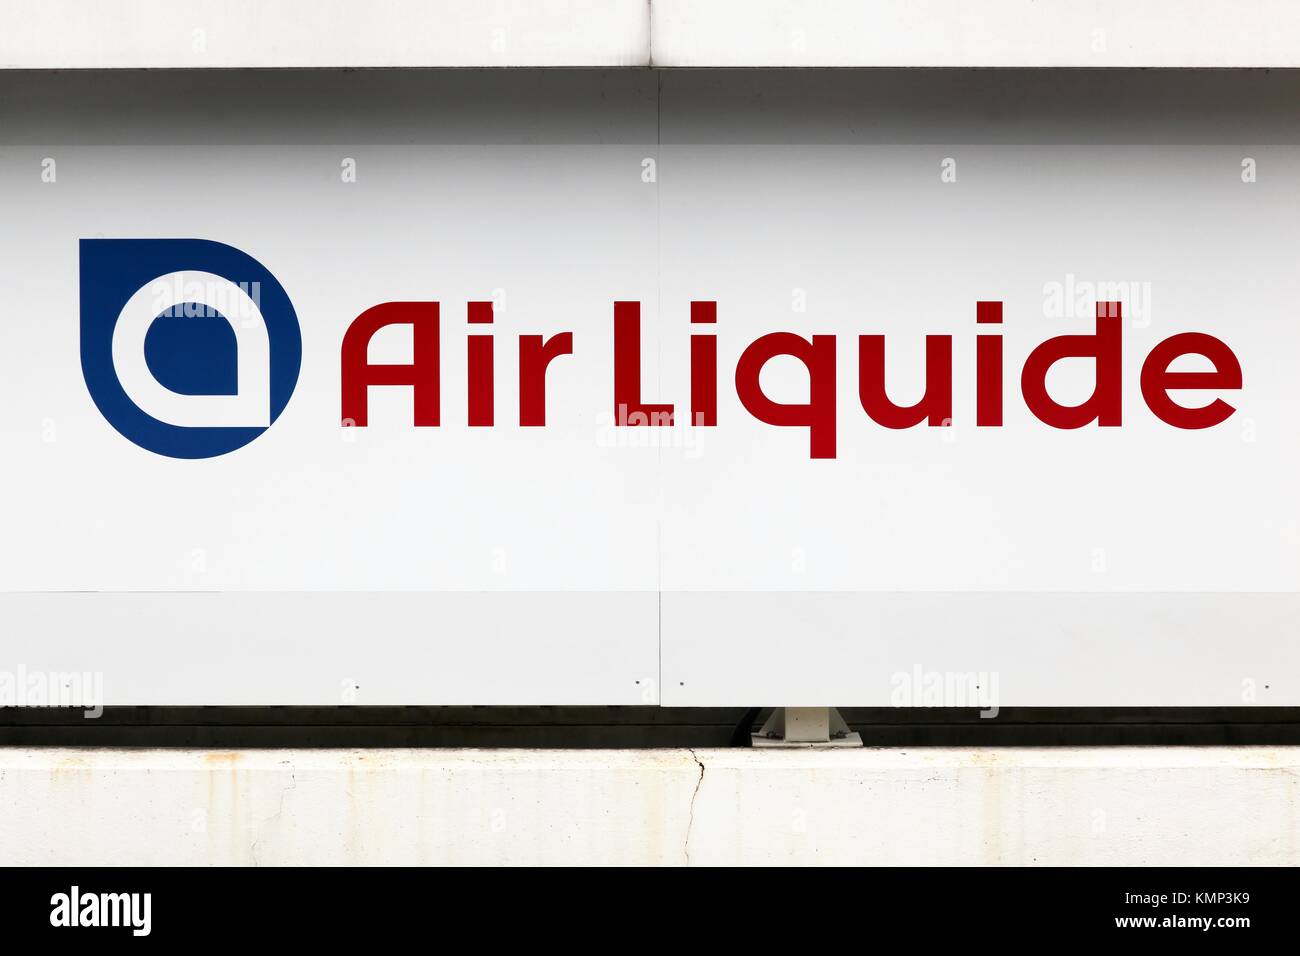 Sassenage, France - June 24, 2017: Air Liquide logo on a wall. Air Liquide is a french multinational company which supplies industrial gases Stock Photo